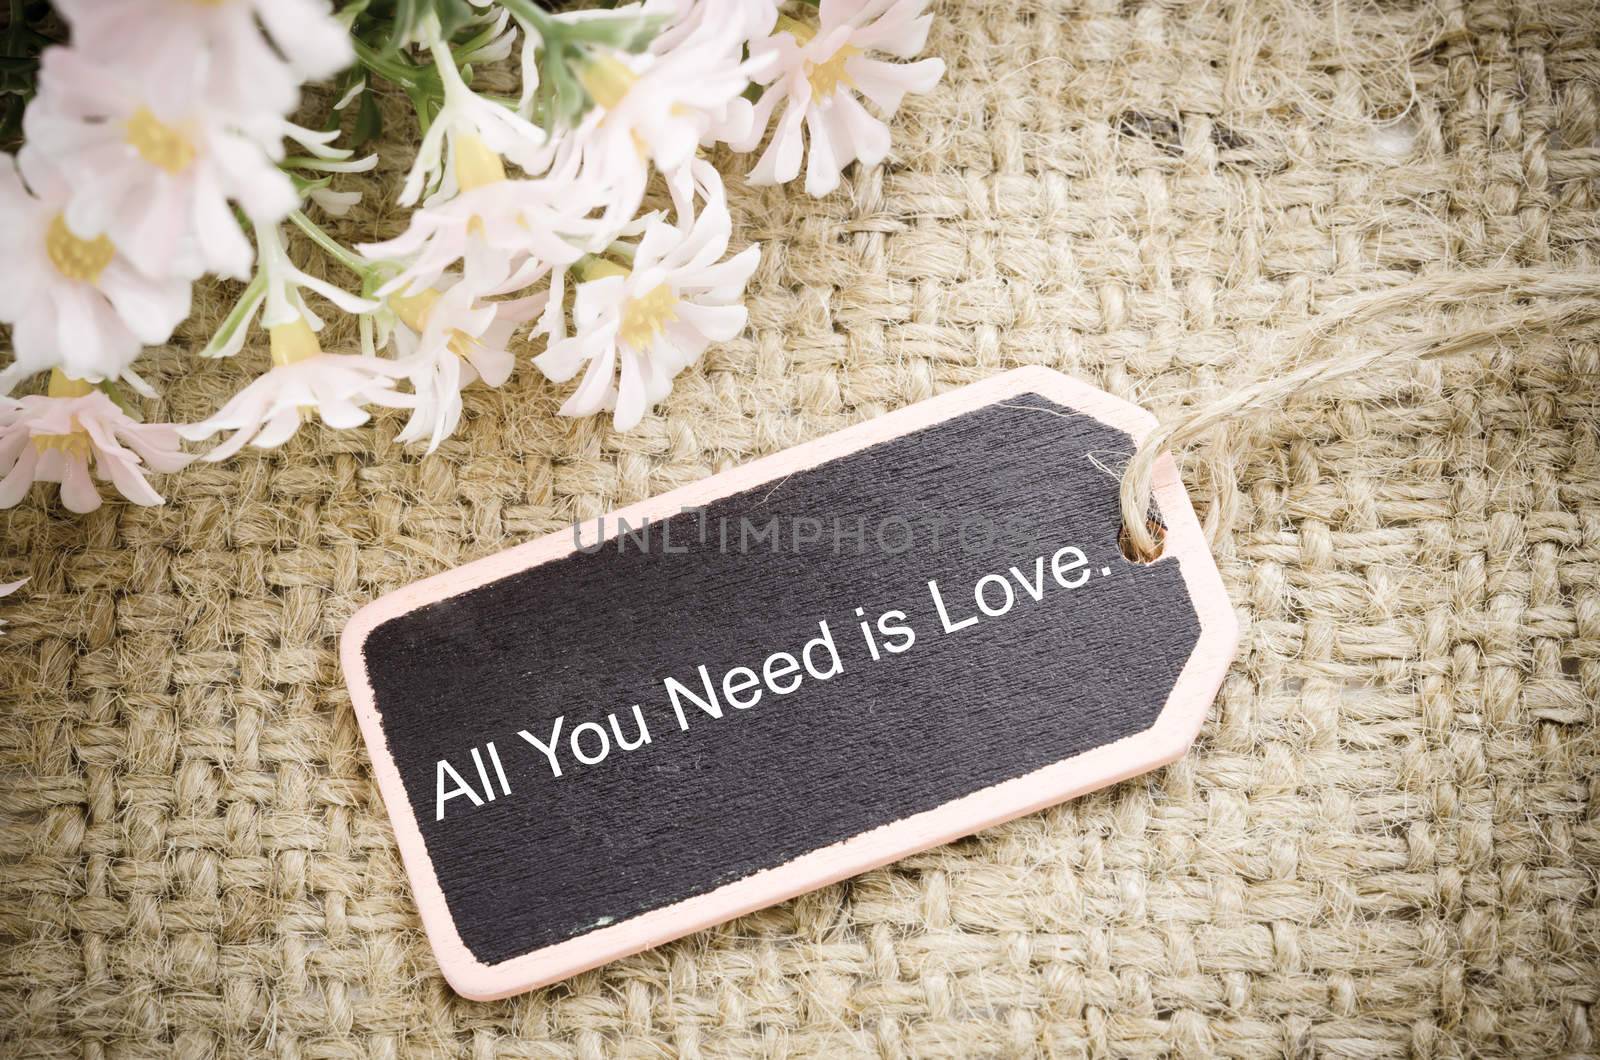 All you need is love vintage wood tag with flower on sack background.